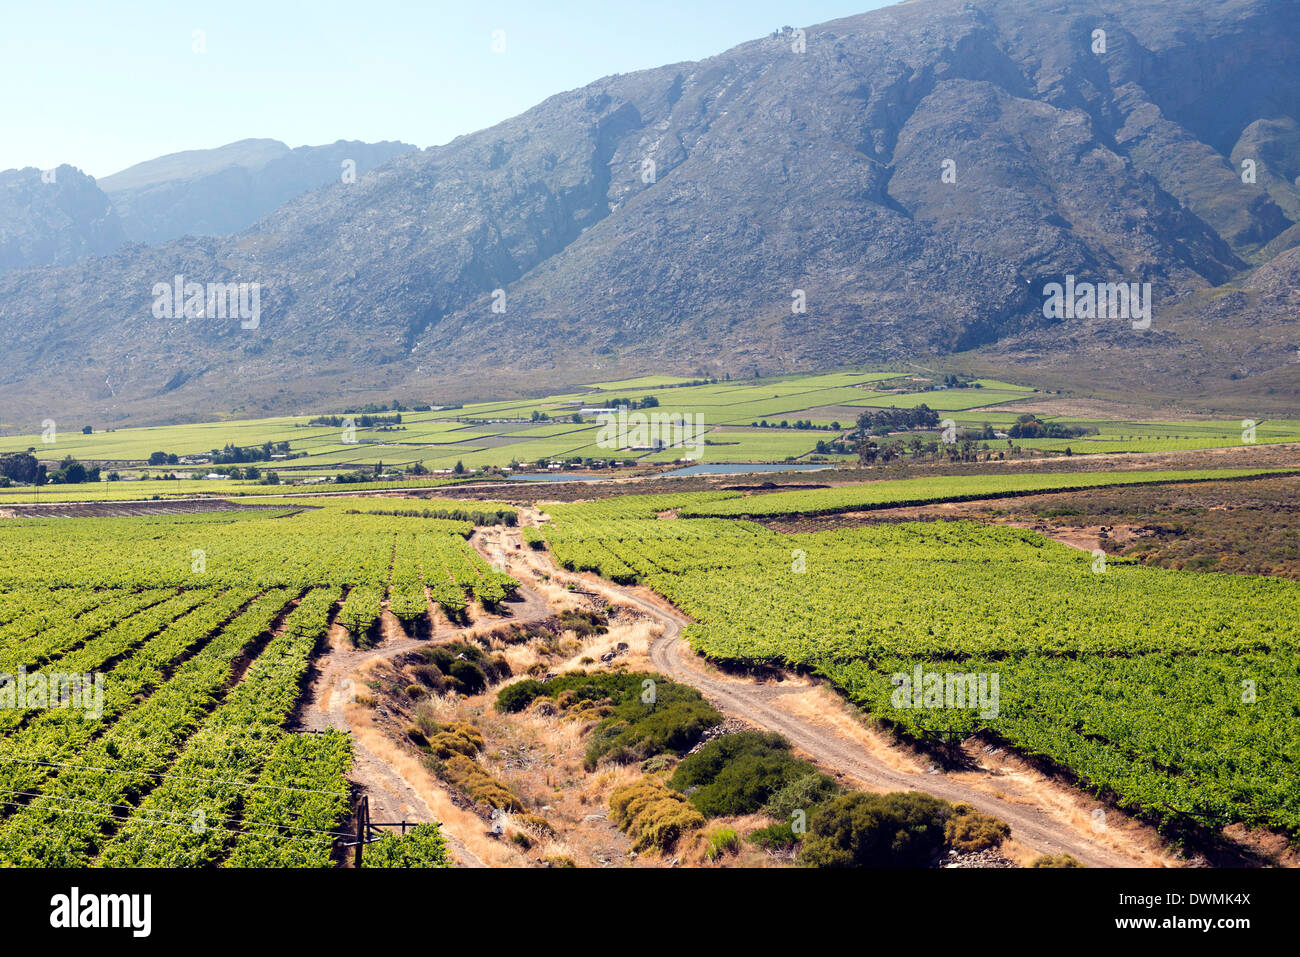 Vineyards and landscape of the Franschhoek area, Western Cape, South Africa, Africa Stock Photo